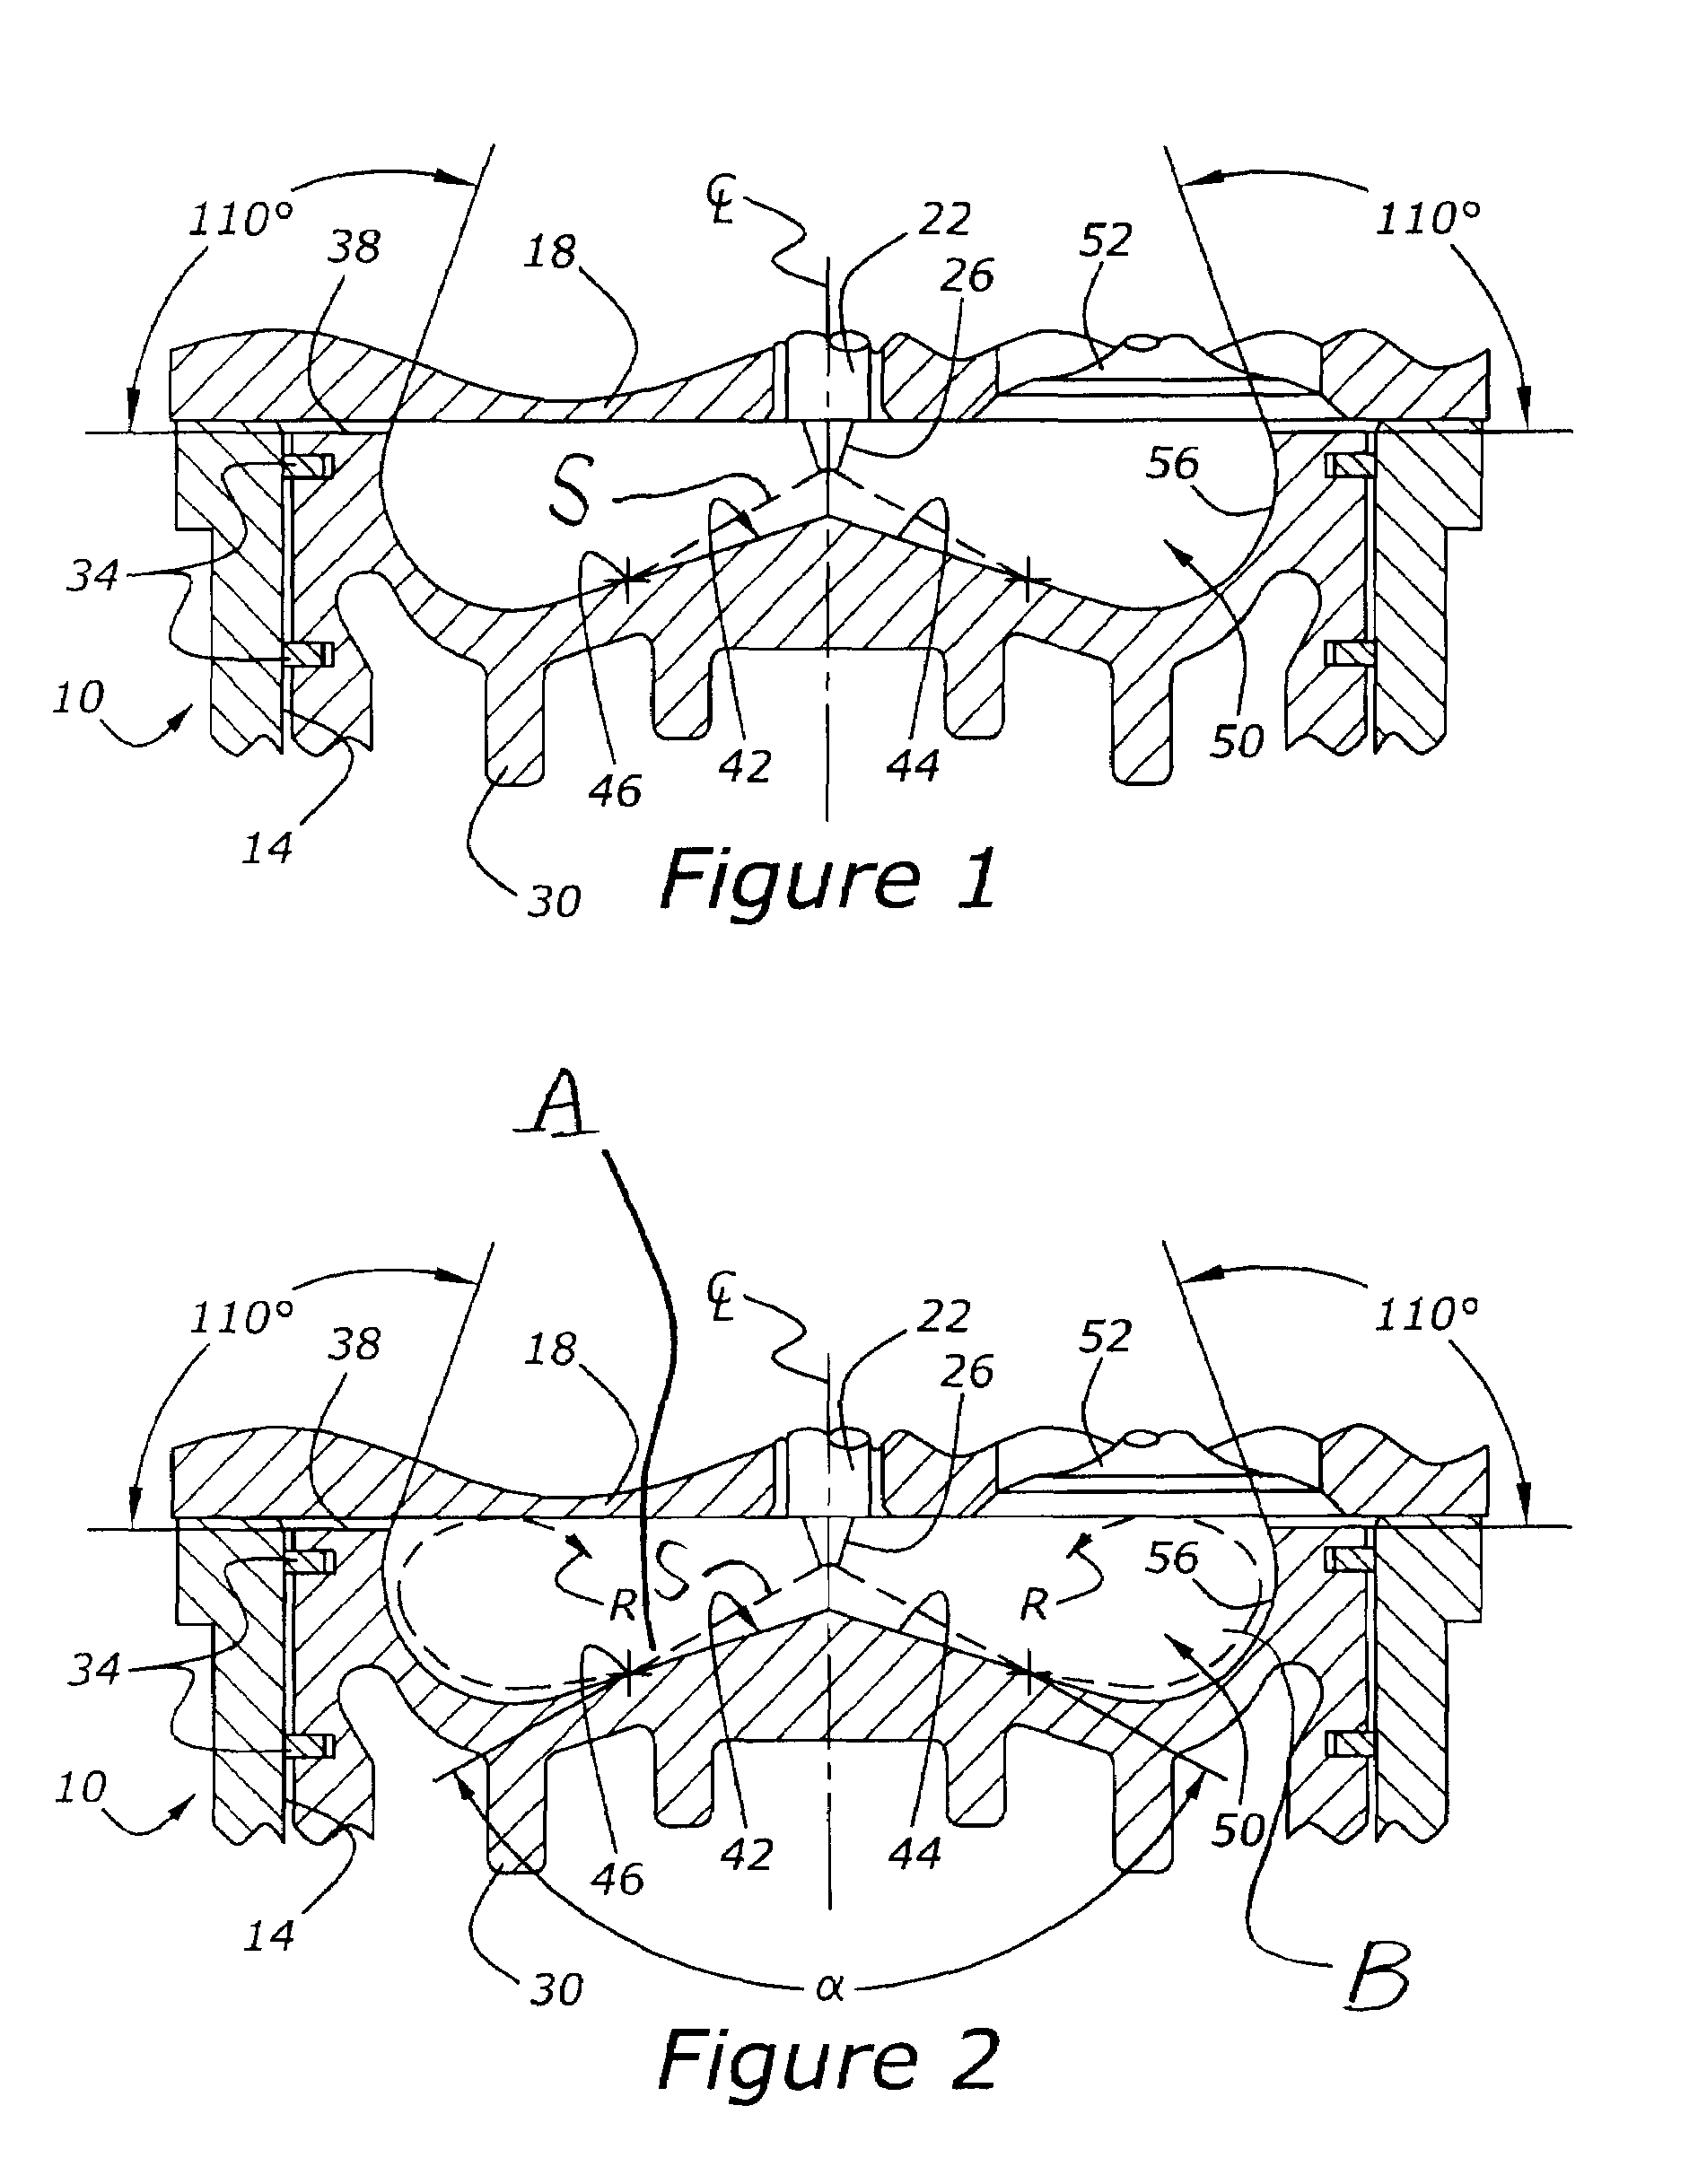 Diesel combustion system with re-entrant piston bowl